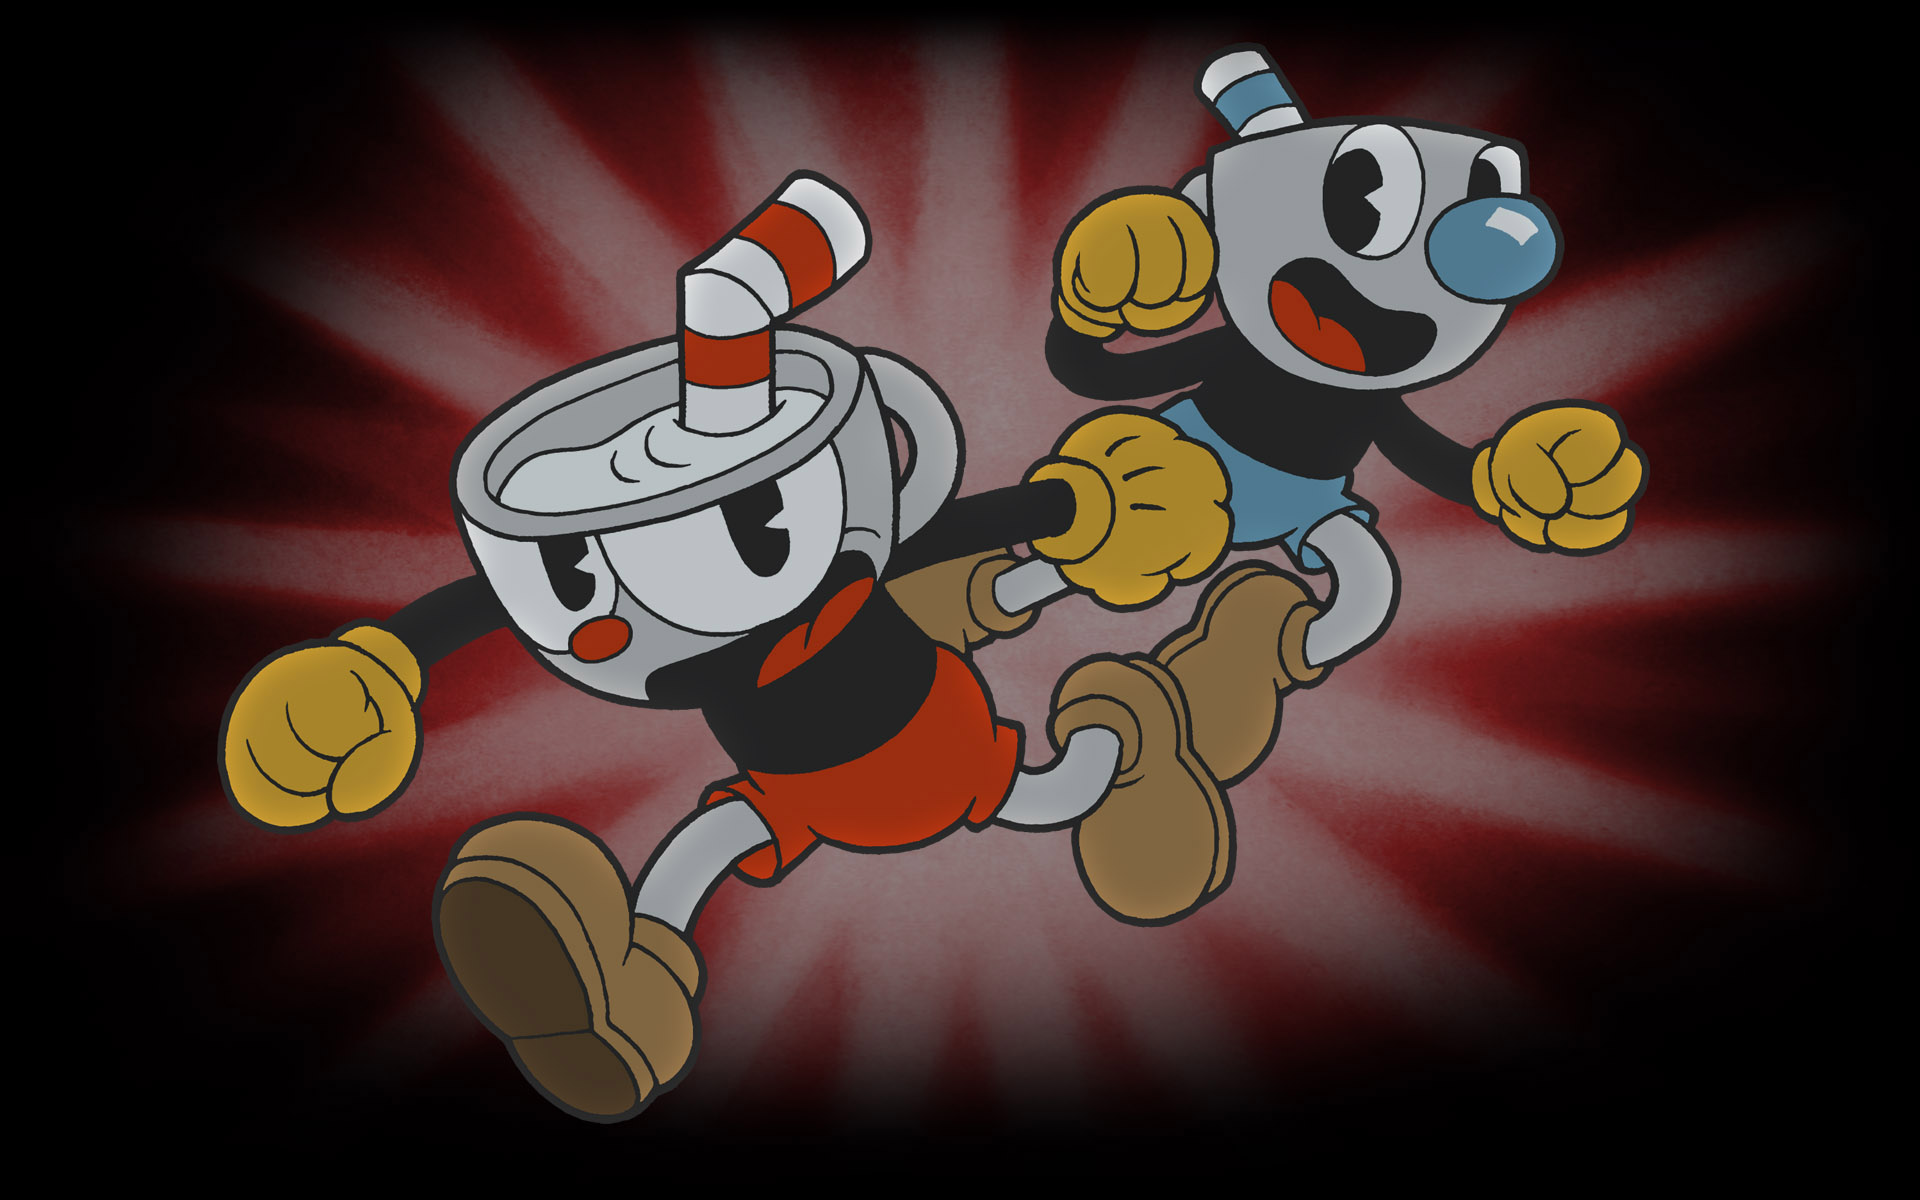 bendy x cuphead with mugman there